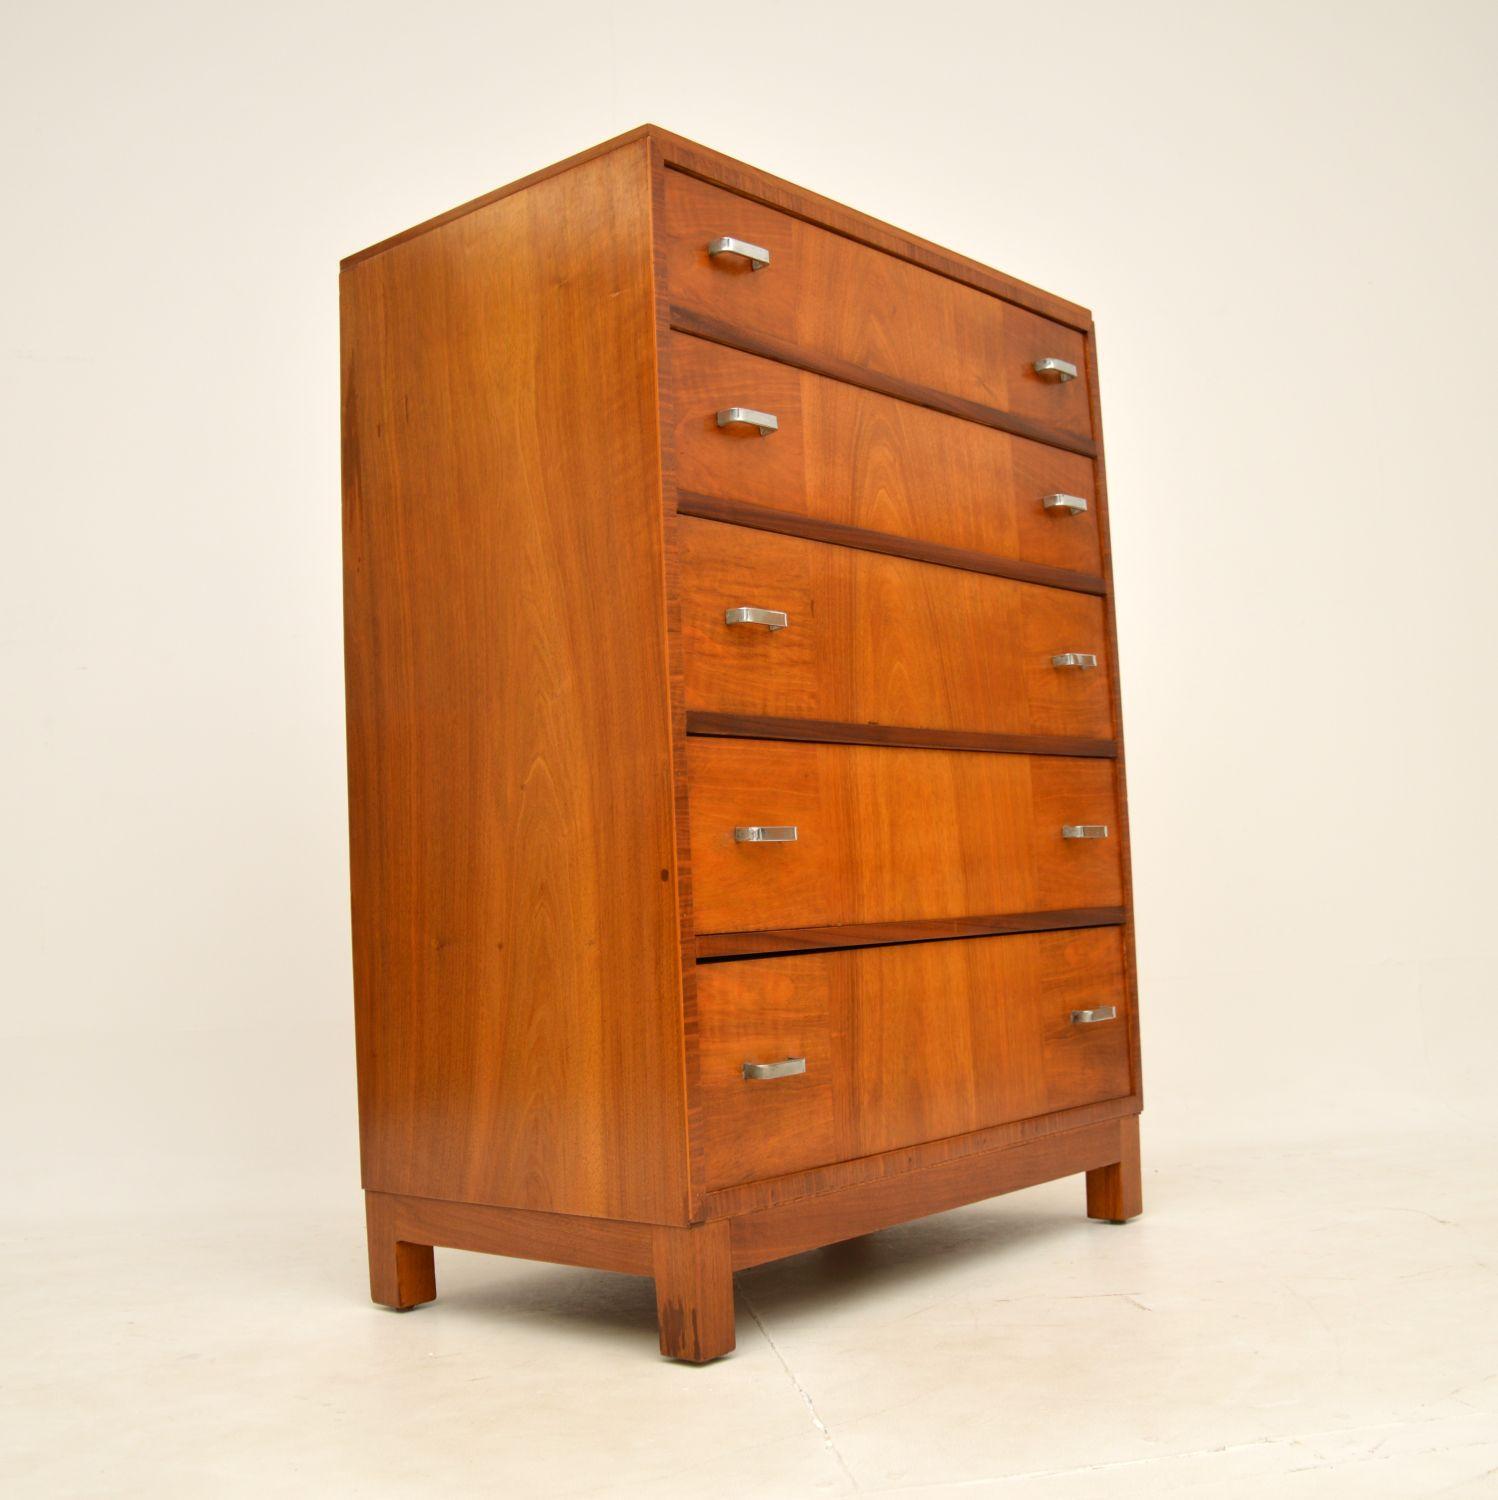 British 1920's Art Deco Walnut Chest of Drawers by Heal's